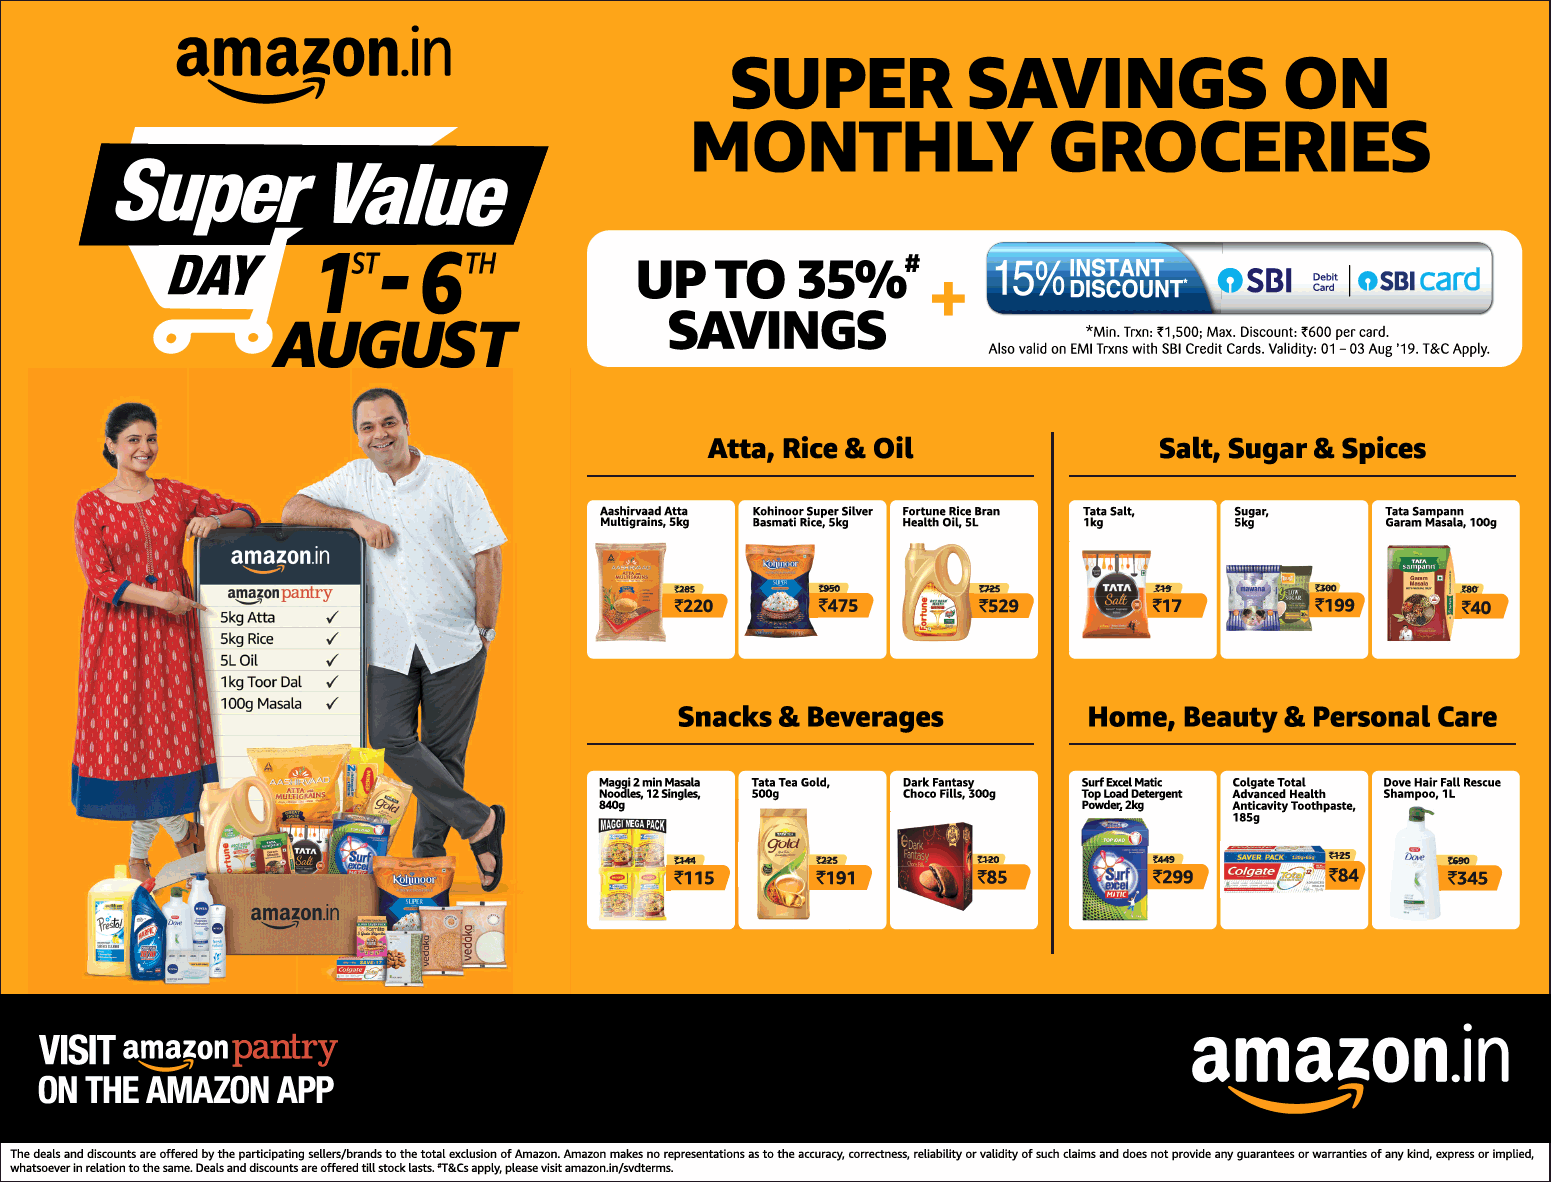 amazon-in-super-savings-on-monthly-groceries-ad-delhi-times-03-08-2019.png